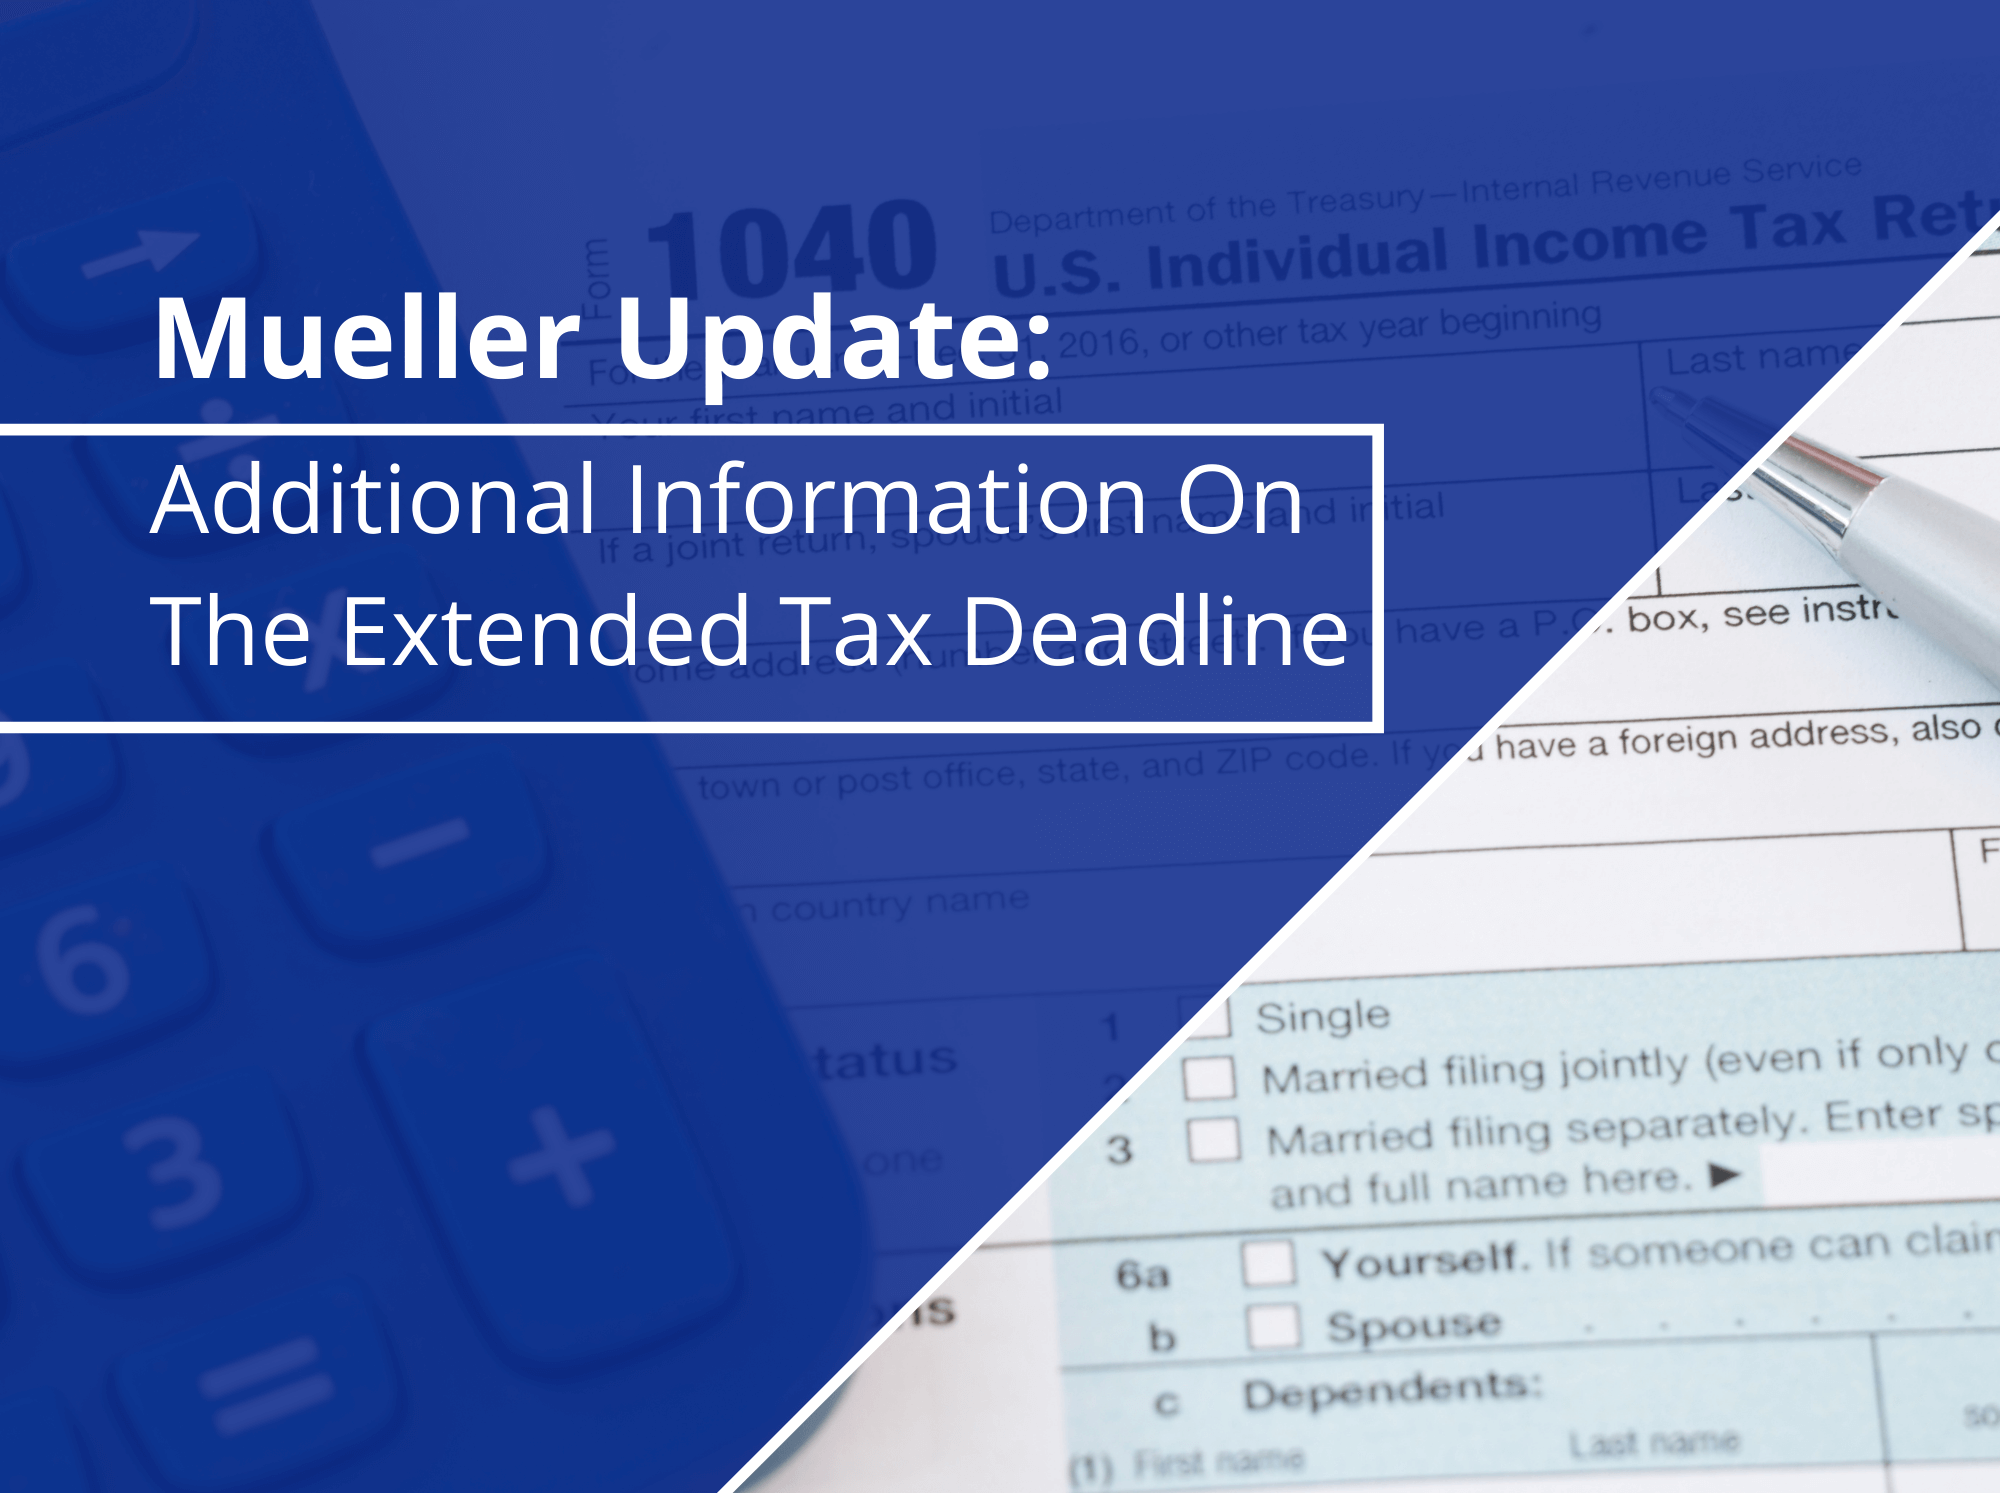 Additional Information On The Extended Tax Deadline